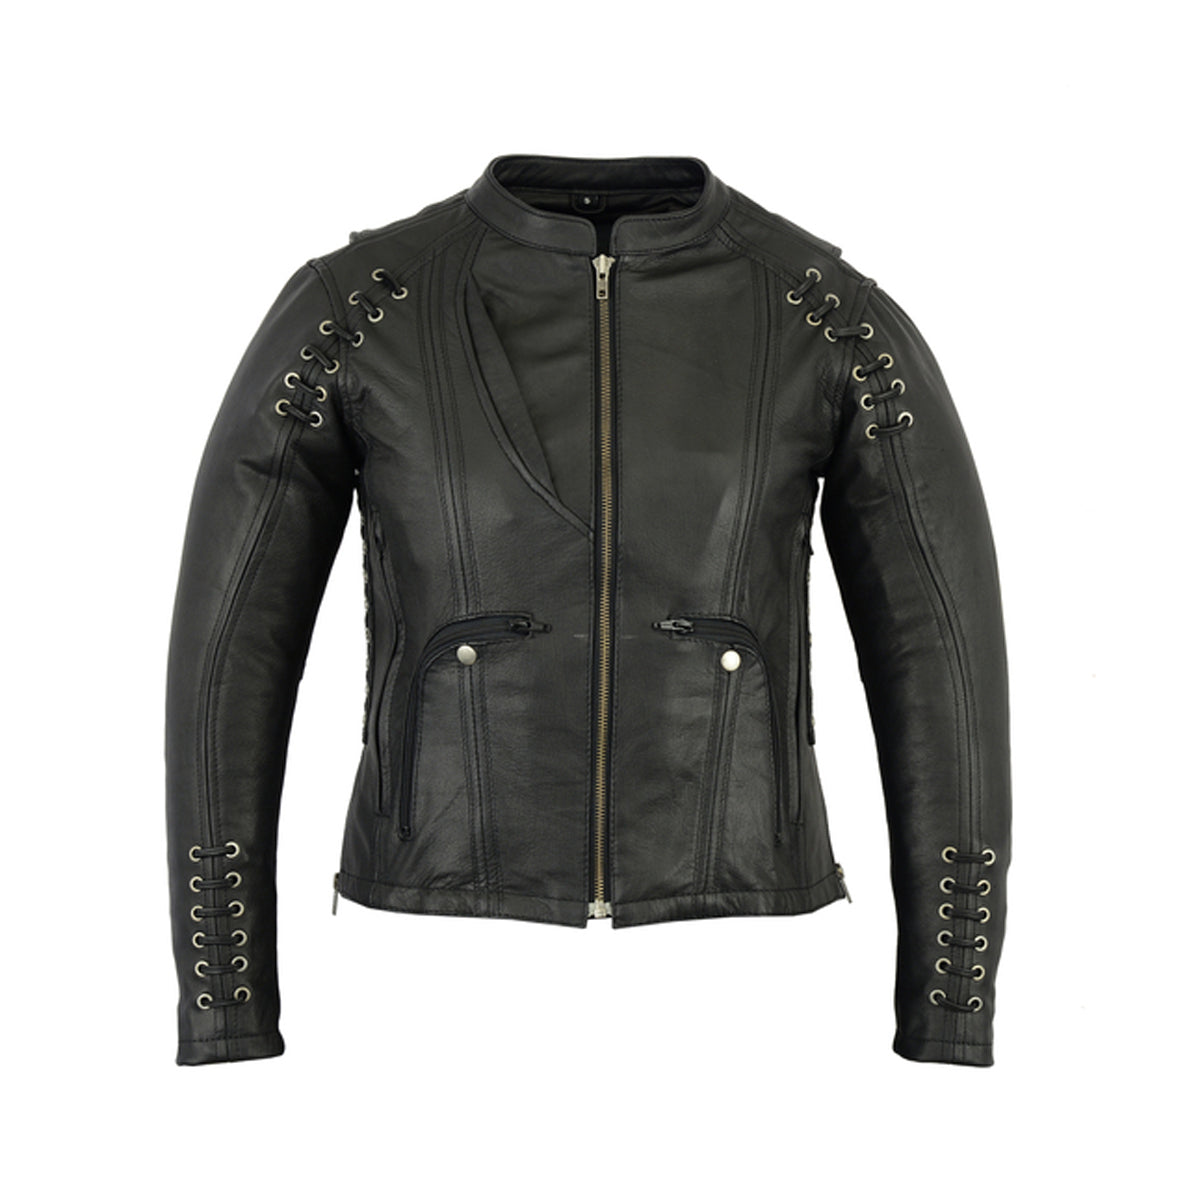 WOMEN'S STYLISH JACKET WITH GROMMET AND LACING ACCENTS